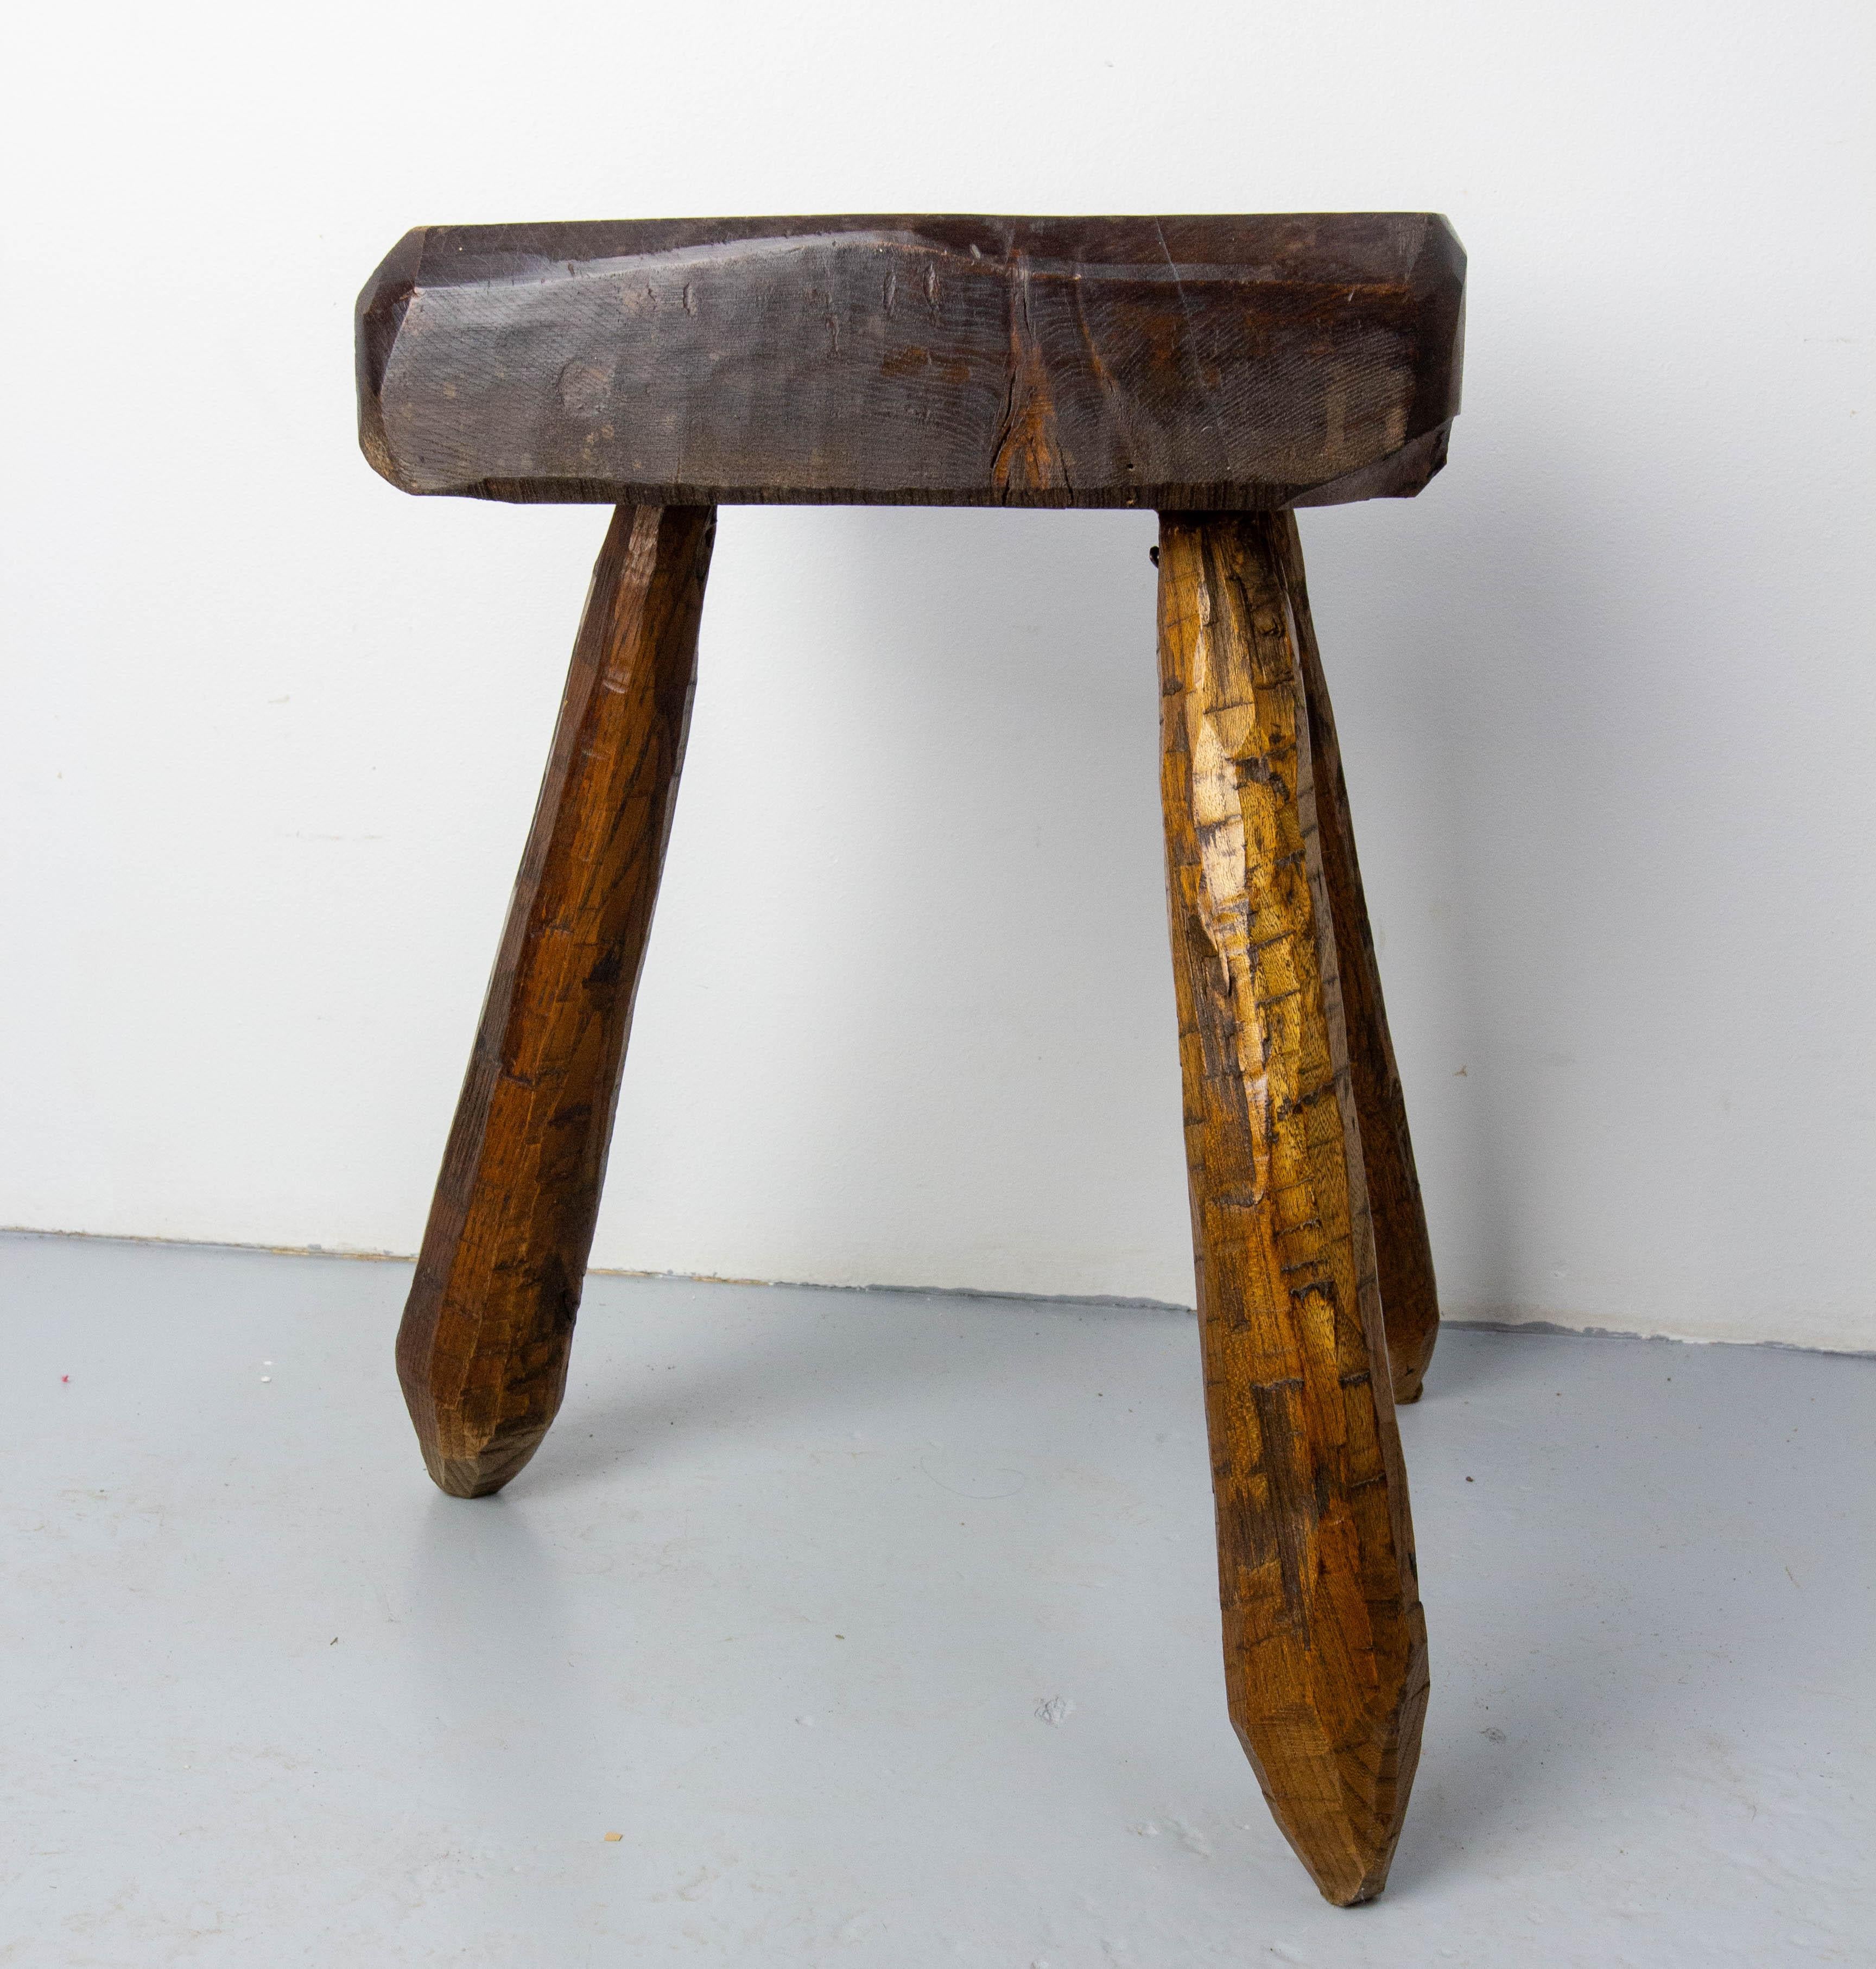 Milking stool or three-leg  square stool, brutalist, 1970, France
Elm
Very good vintage condition.

Shipping: 
37 / 37 / 44 cm 4.5 kg.